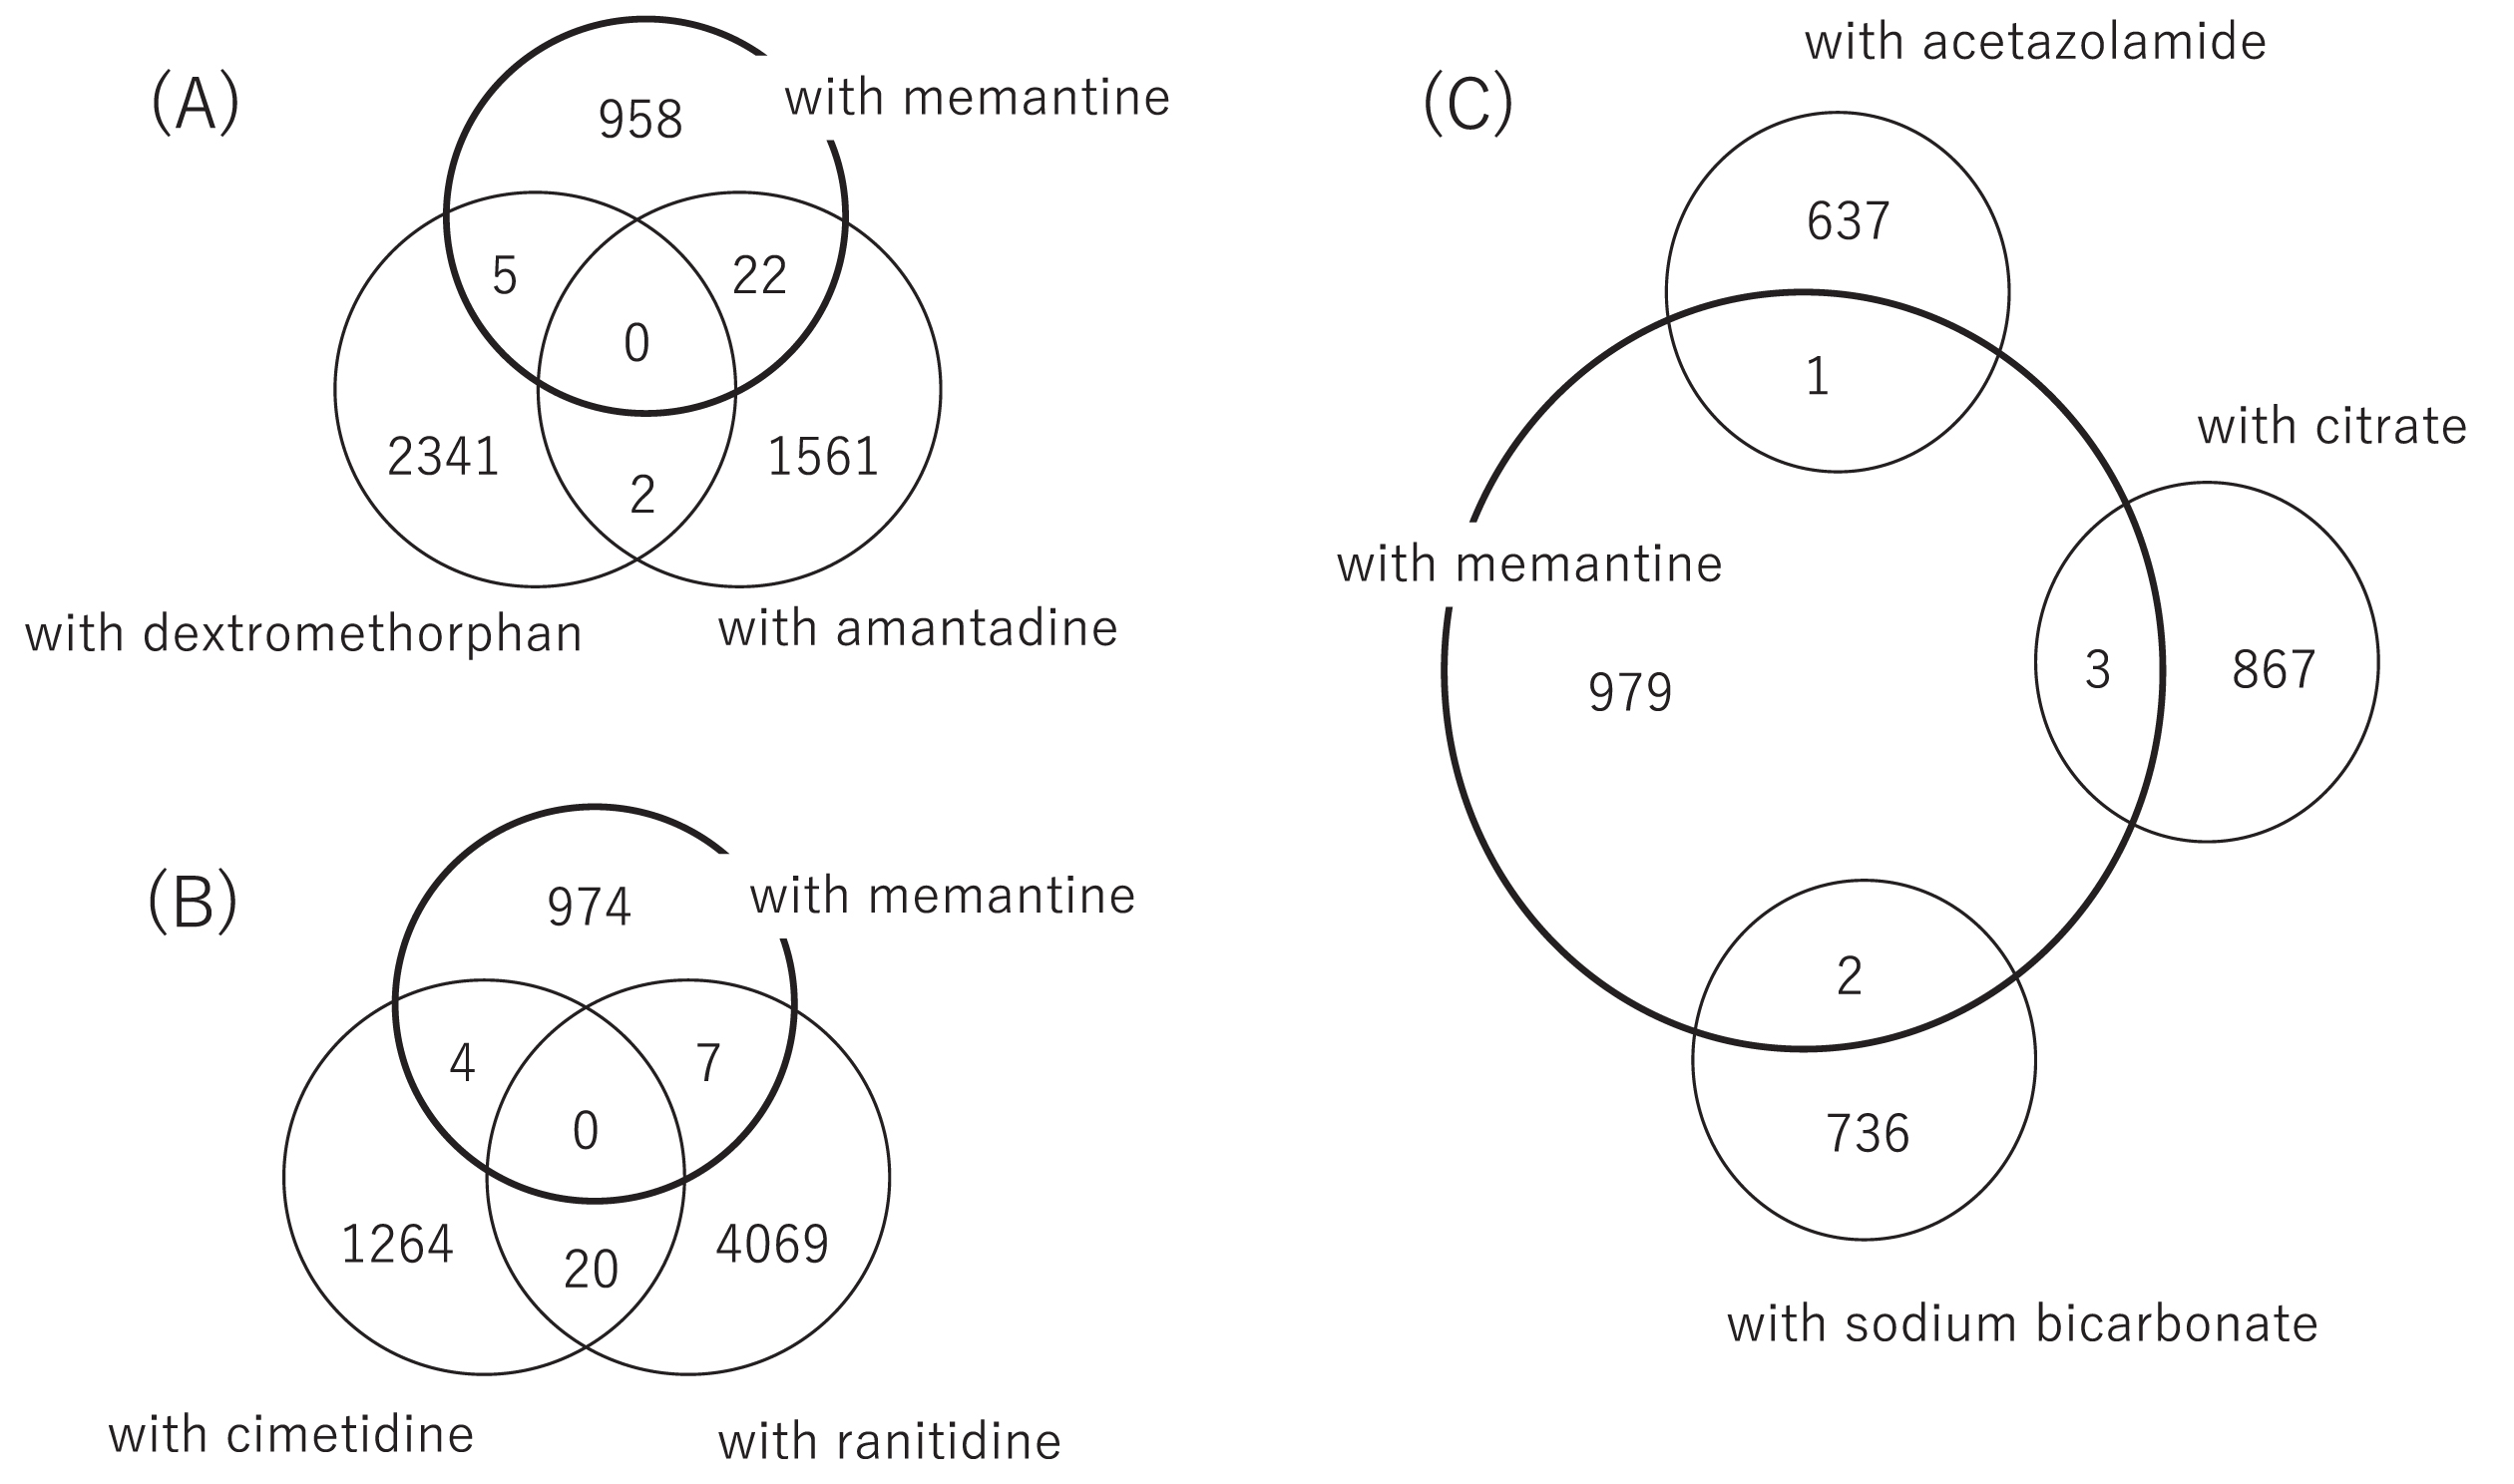 Cases overlapping between exposure to memantine and other drugs of interest. The number of cases taking memantine in combination with other drugs of interest was relatively small, and there were no patients who were co-administered with memantine plus procainamide, quinidine, acetazolamide, or citrate. The combination of memantine and amantadine was most frequently observed (n = 22) (A), followed by the combination of memantine plus ranitidine (n = 7) (B), memantine plus dextromethorphan (n = 5) (A), memantine plus cimetidine (n = 4) (B), and so on. There were few cases administrated with multiple kinds of these drugs.